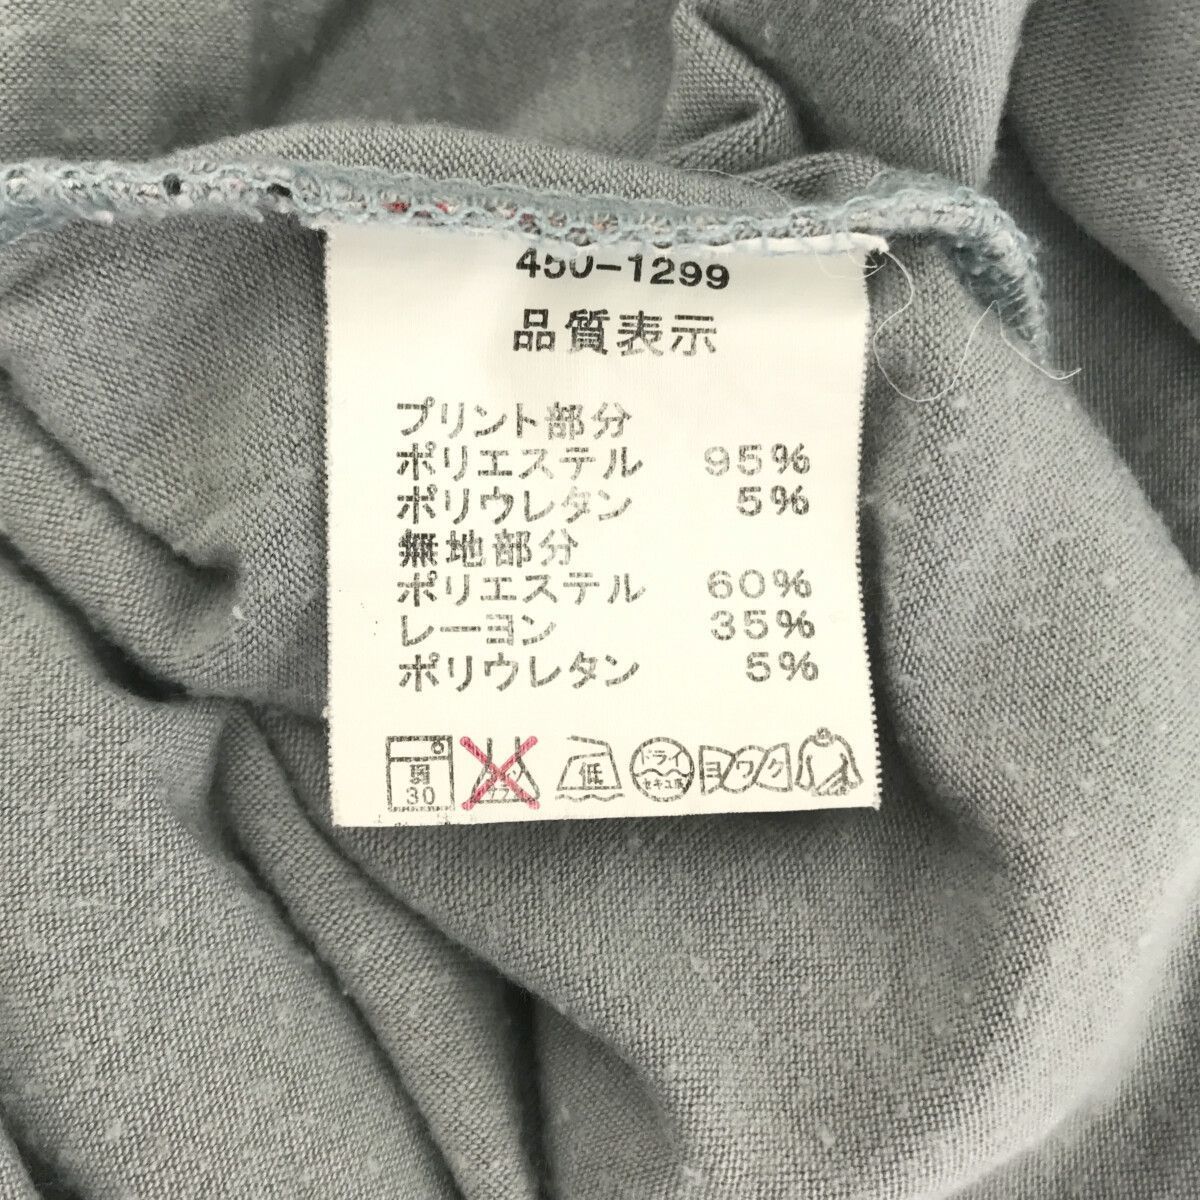 * beautiful goods * 100 . tops cut and sewn ensemble V neck casual stylish 7 minute height lady's total pattern gray 901-4814 free shipping old clothes 